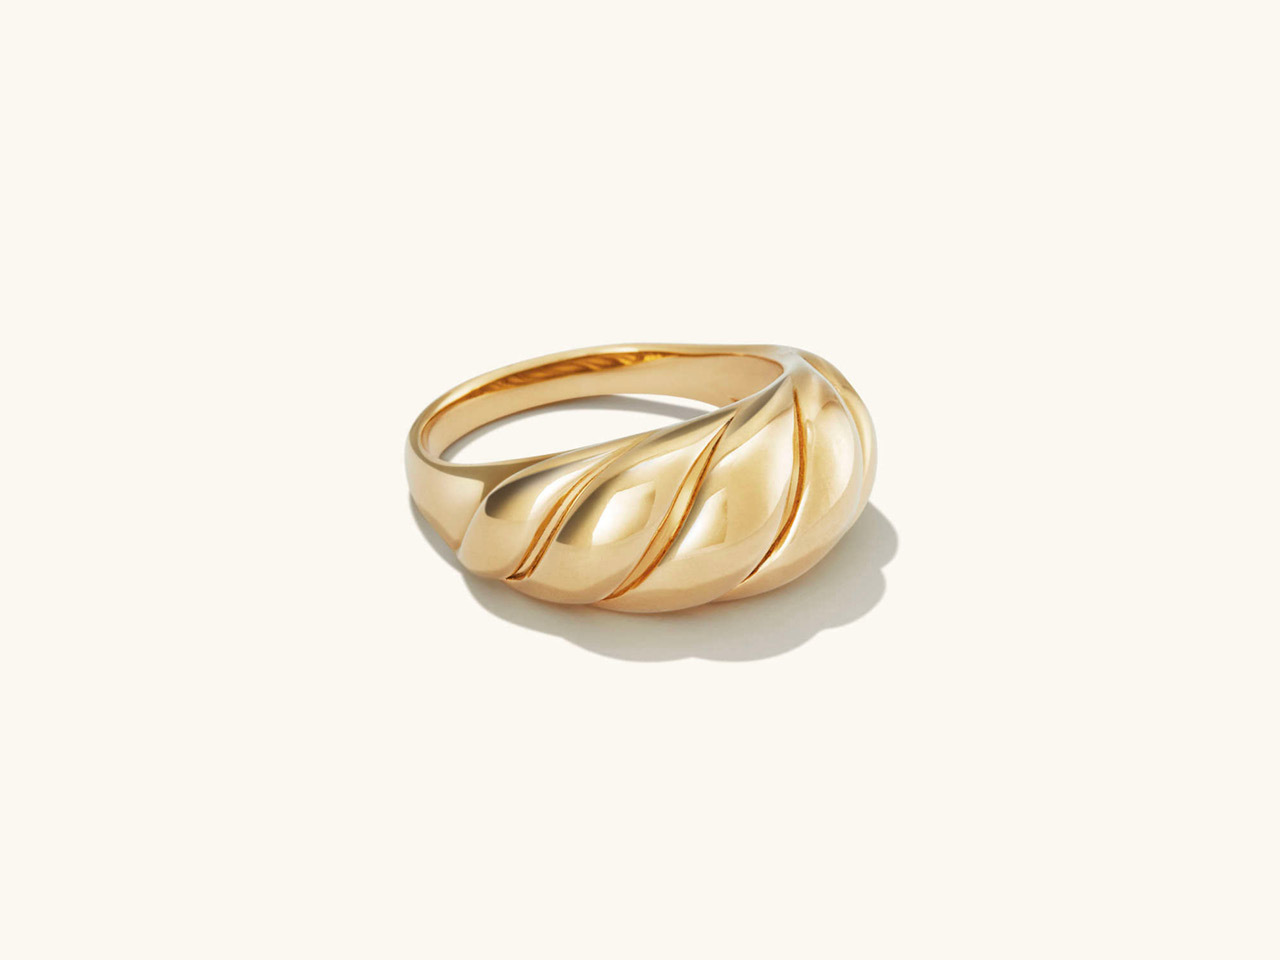 A Mejuri croissant dome ring that is part of the best Black Friday Sales